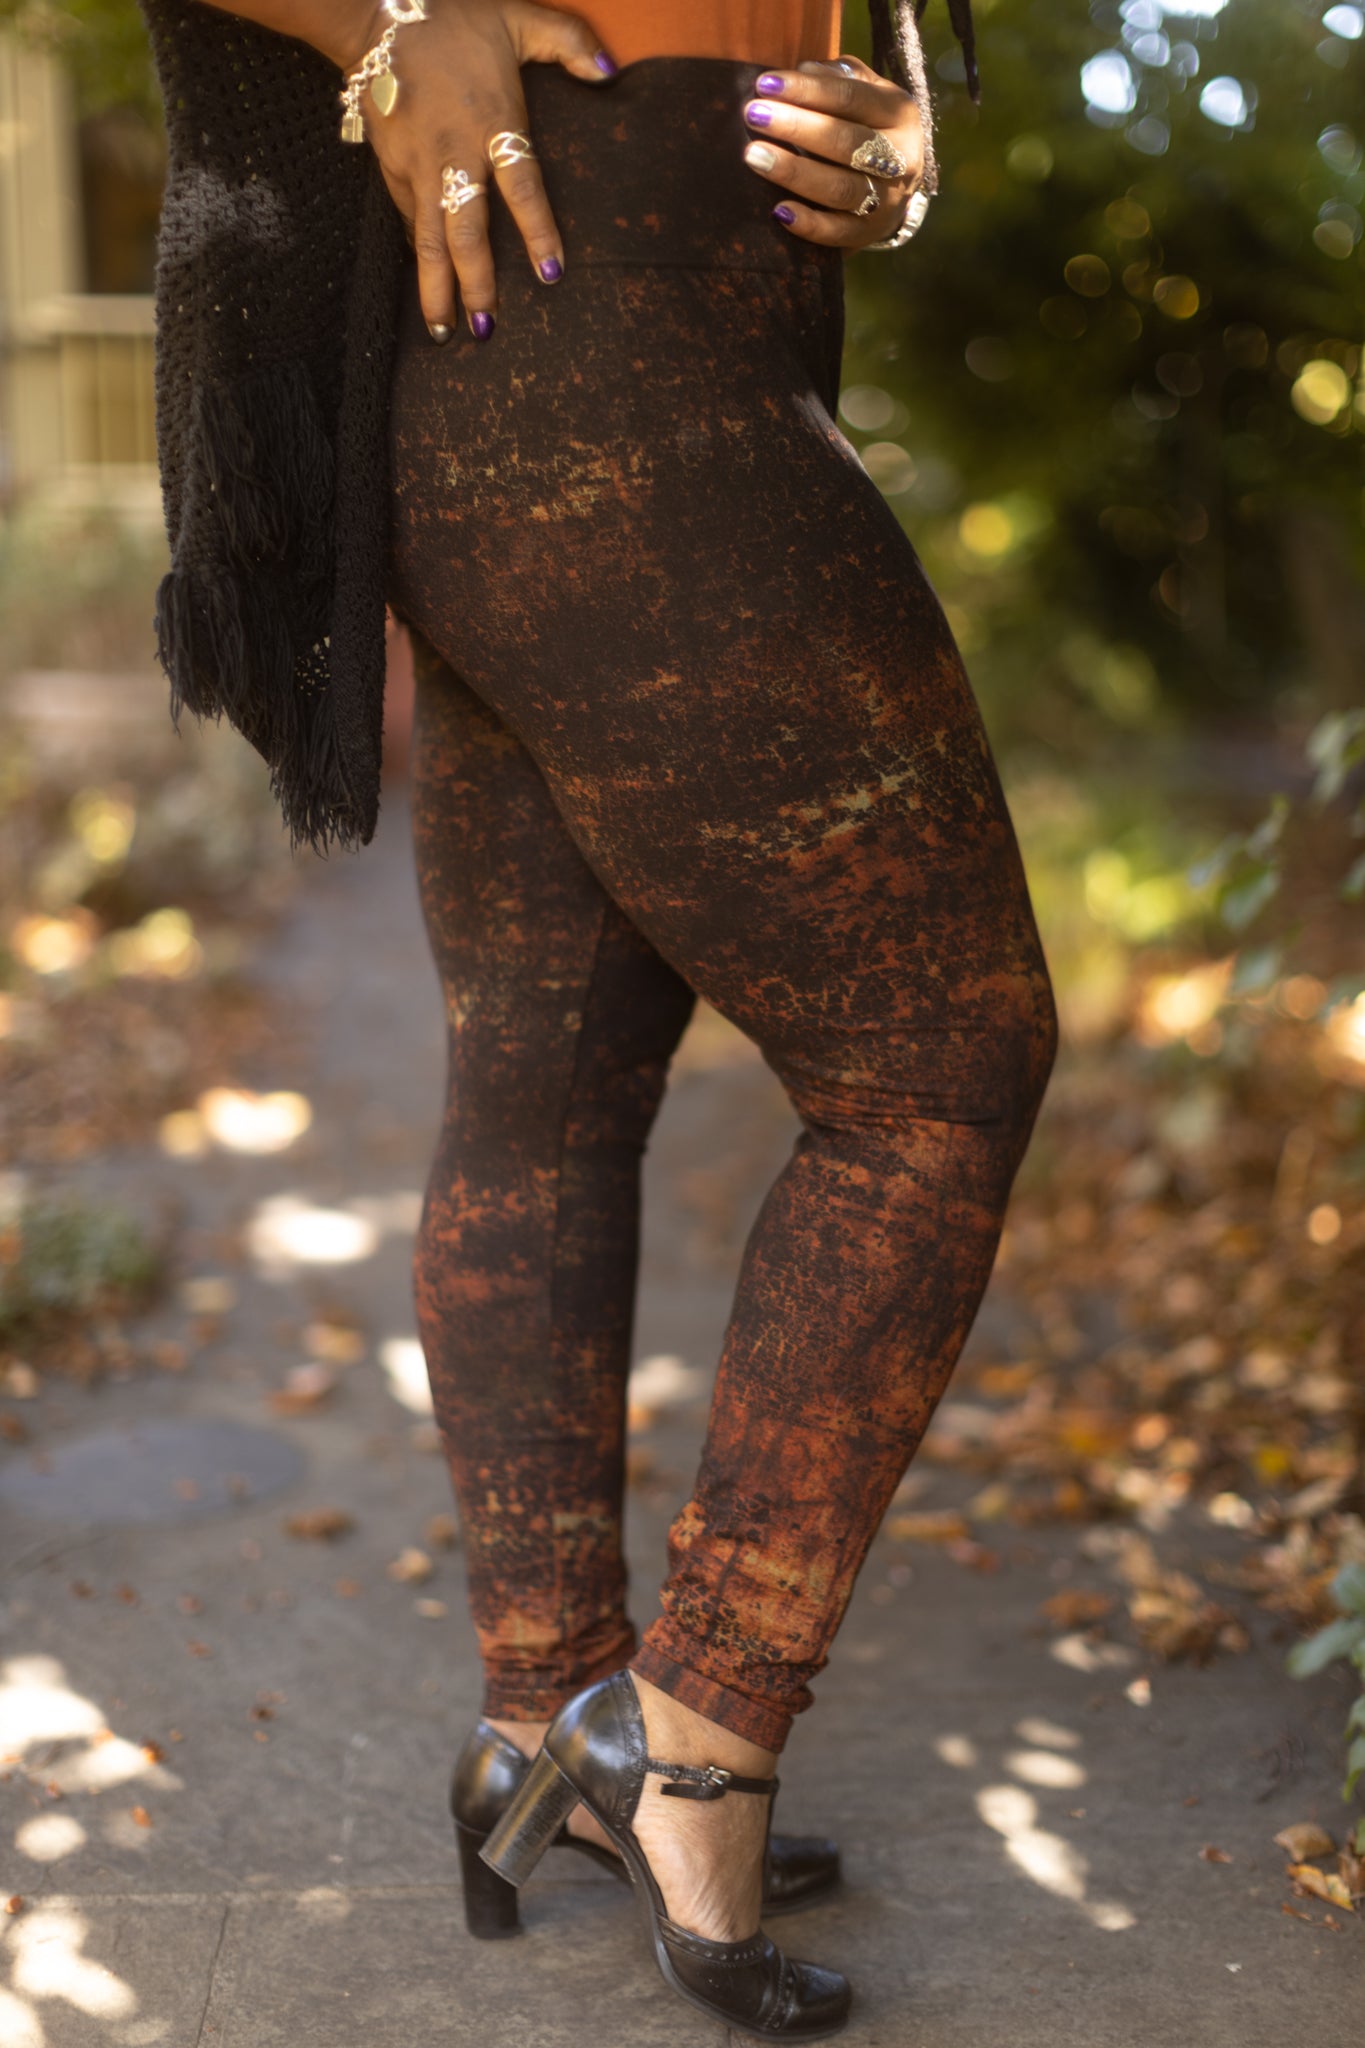 We reviewed Spanx bestselling leggings. These are our favorites